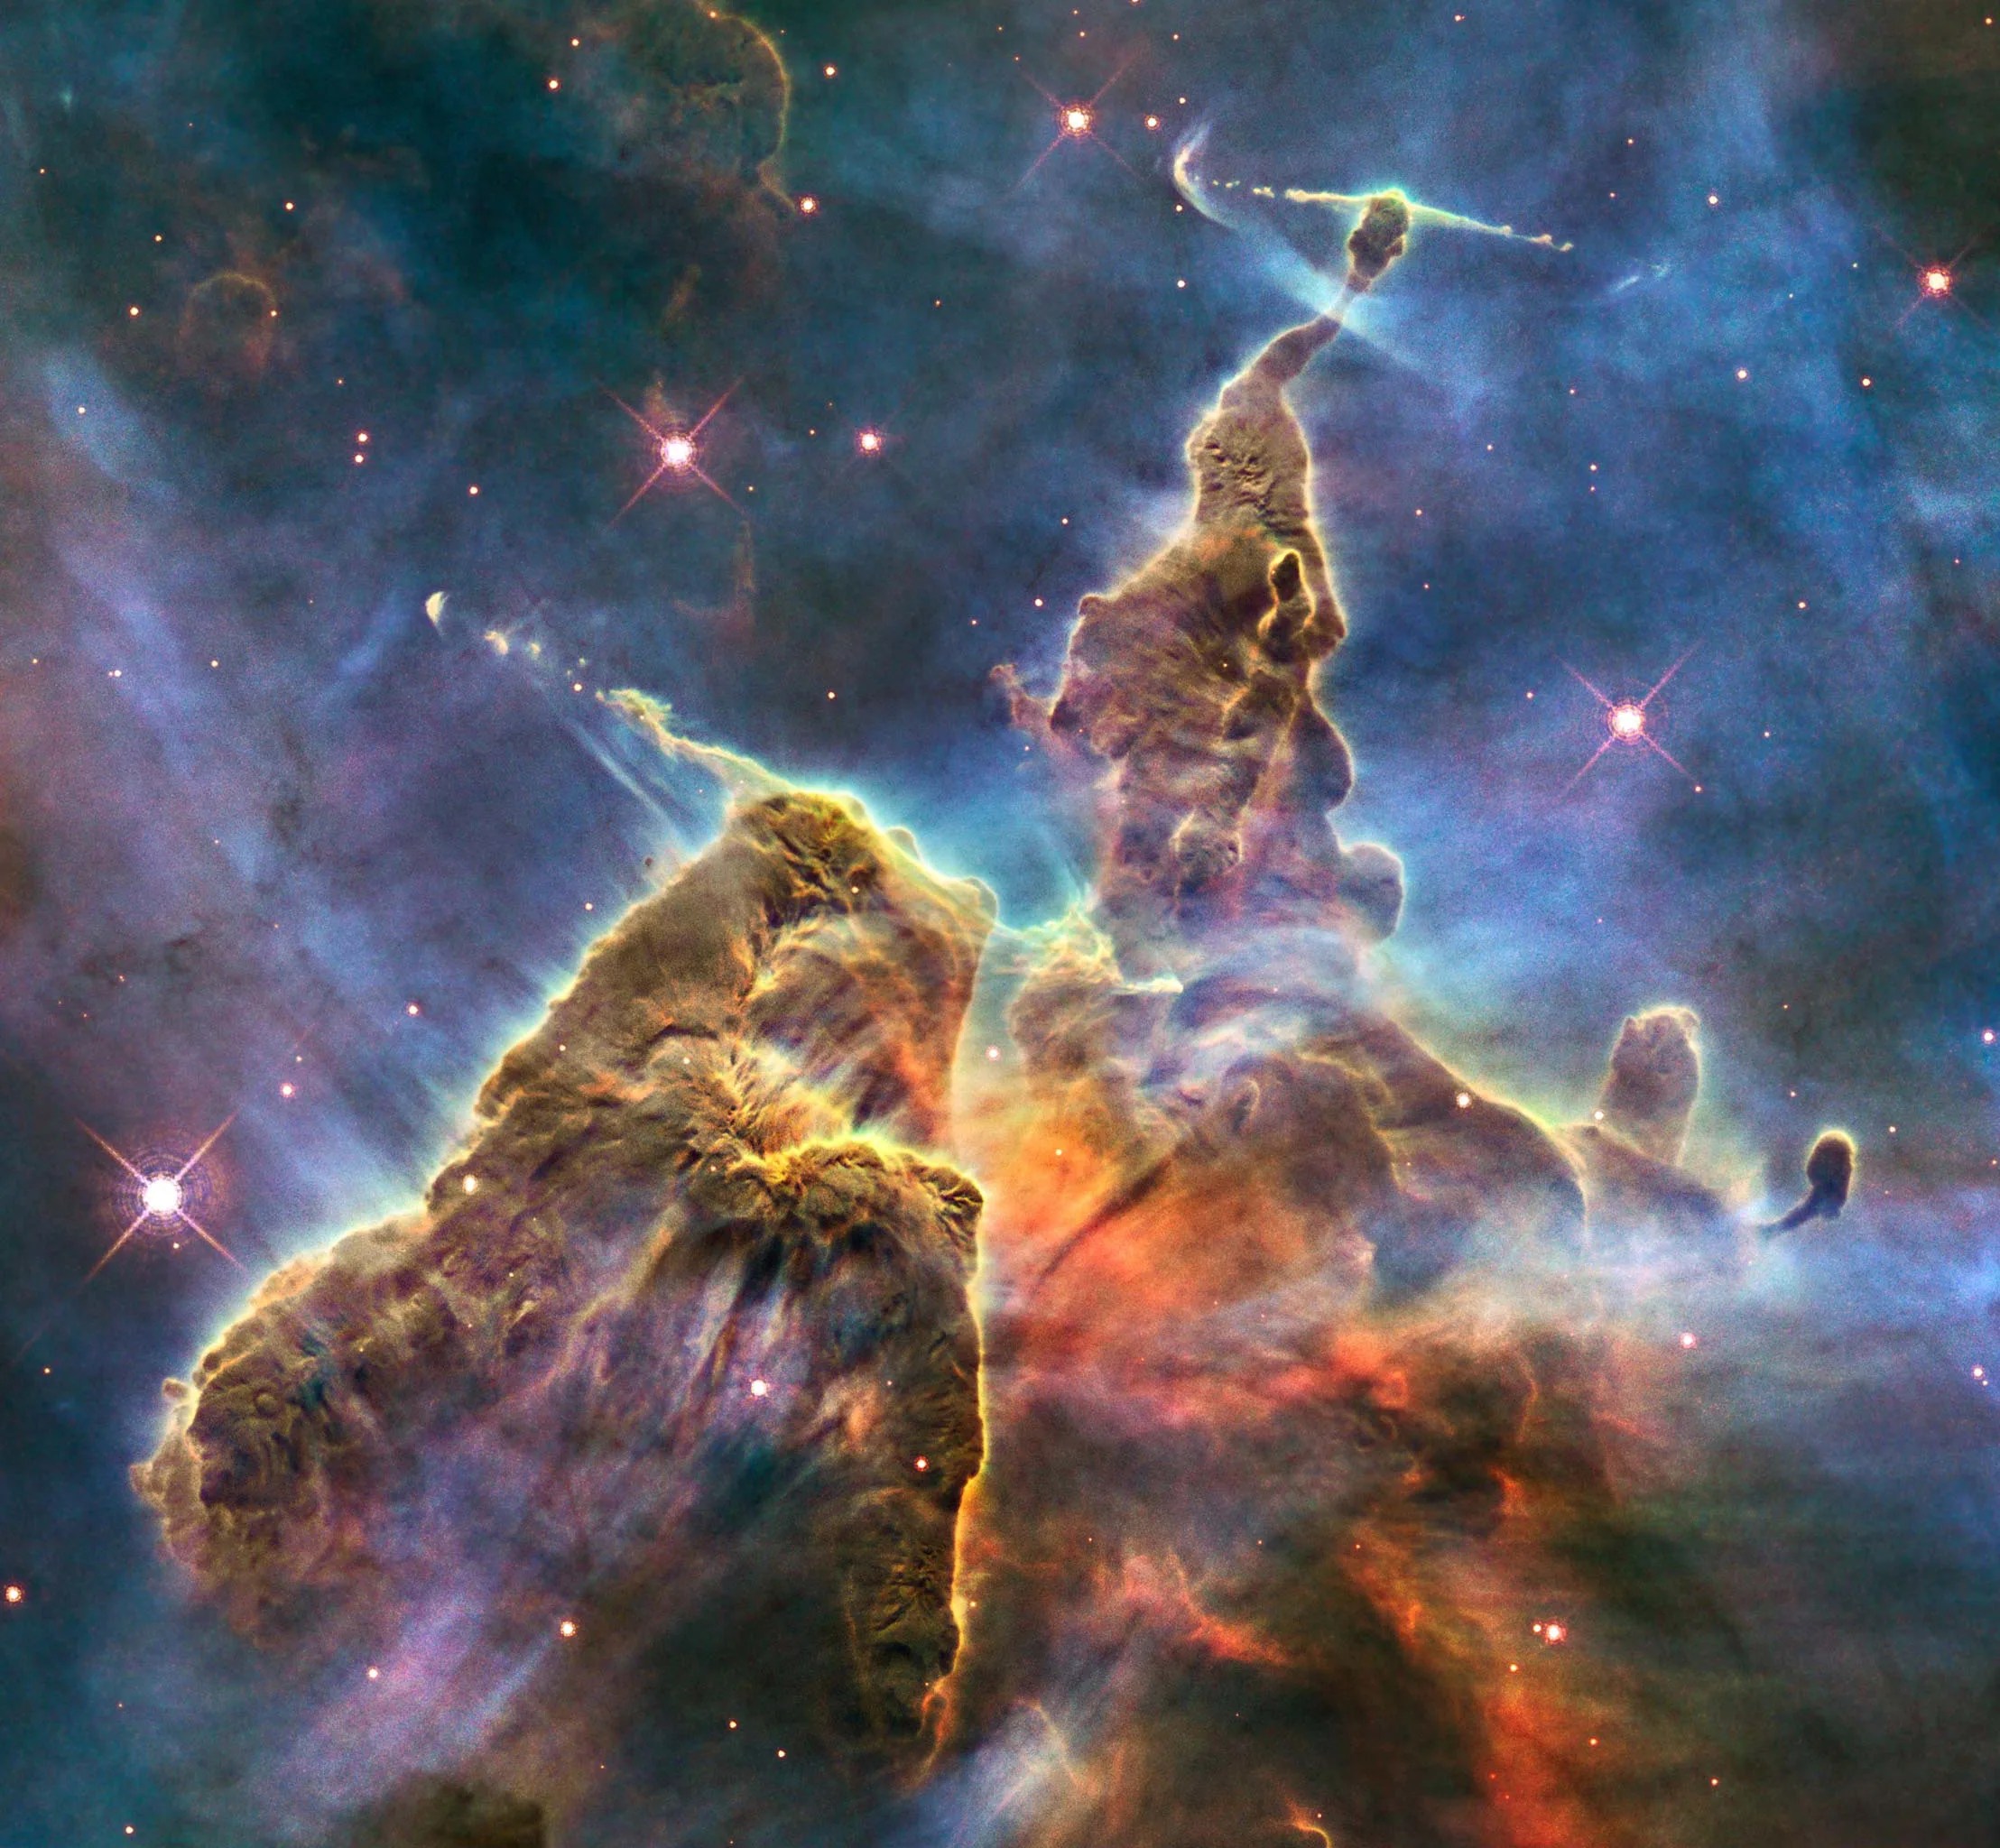 The Mystic Mountain is a chaotic, colorful pillar of gas and dust stretching up and narrowing toward the top of the image. The pillar is seen in mostly brown, yellow, and orange hues, jutting against a hazy blue and purple background dotted with a few pink stars.